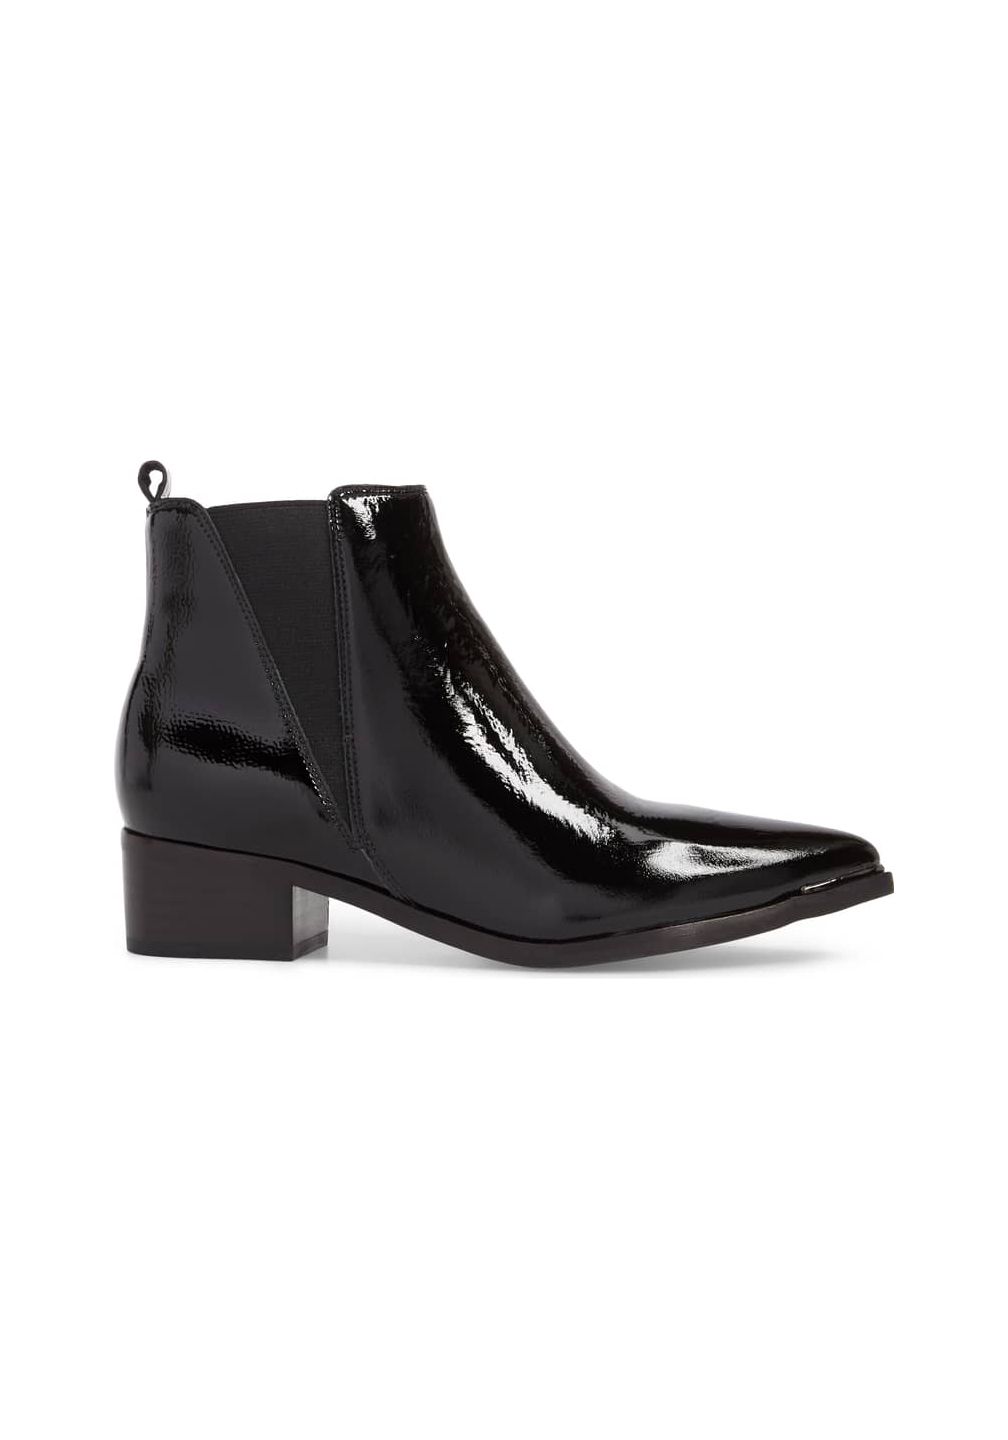 The 3 Most Comfortable Ankle Boots for Walking | Who What Wear